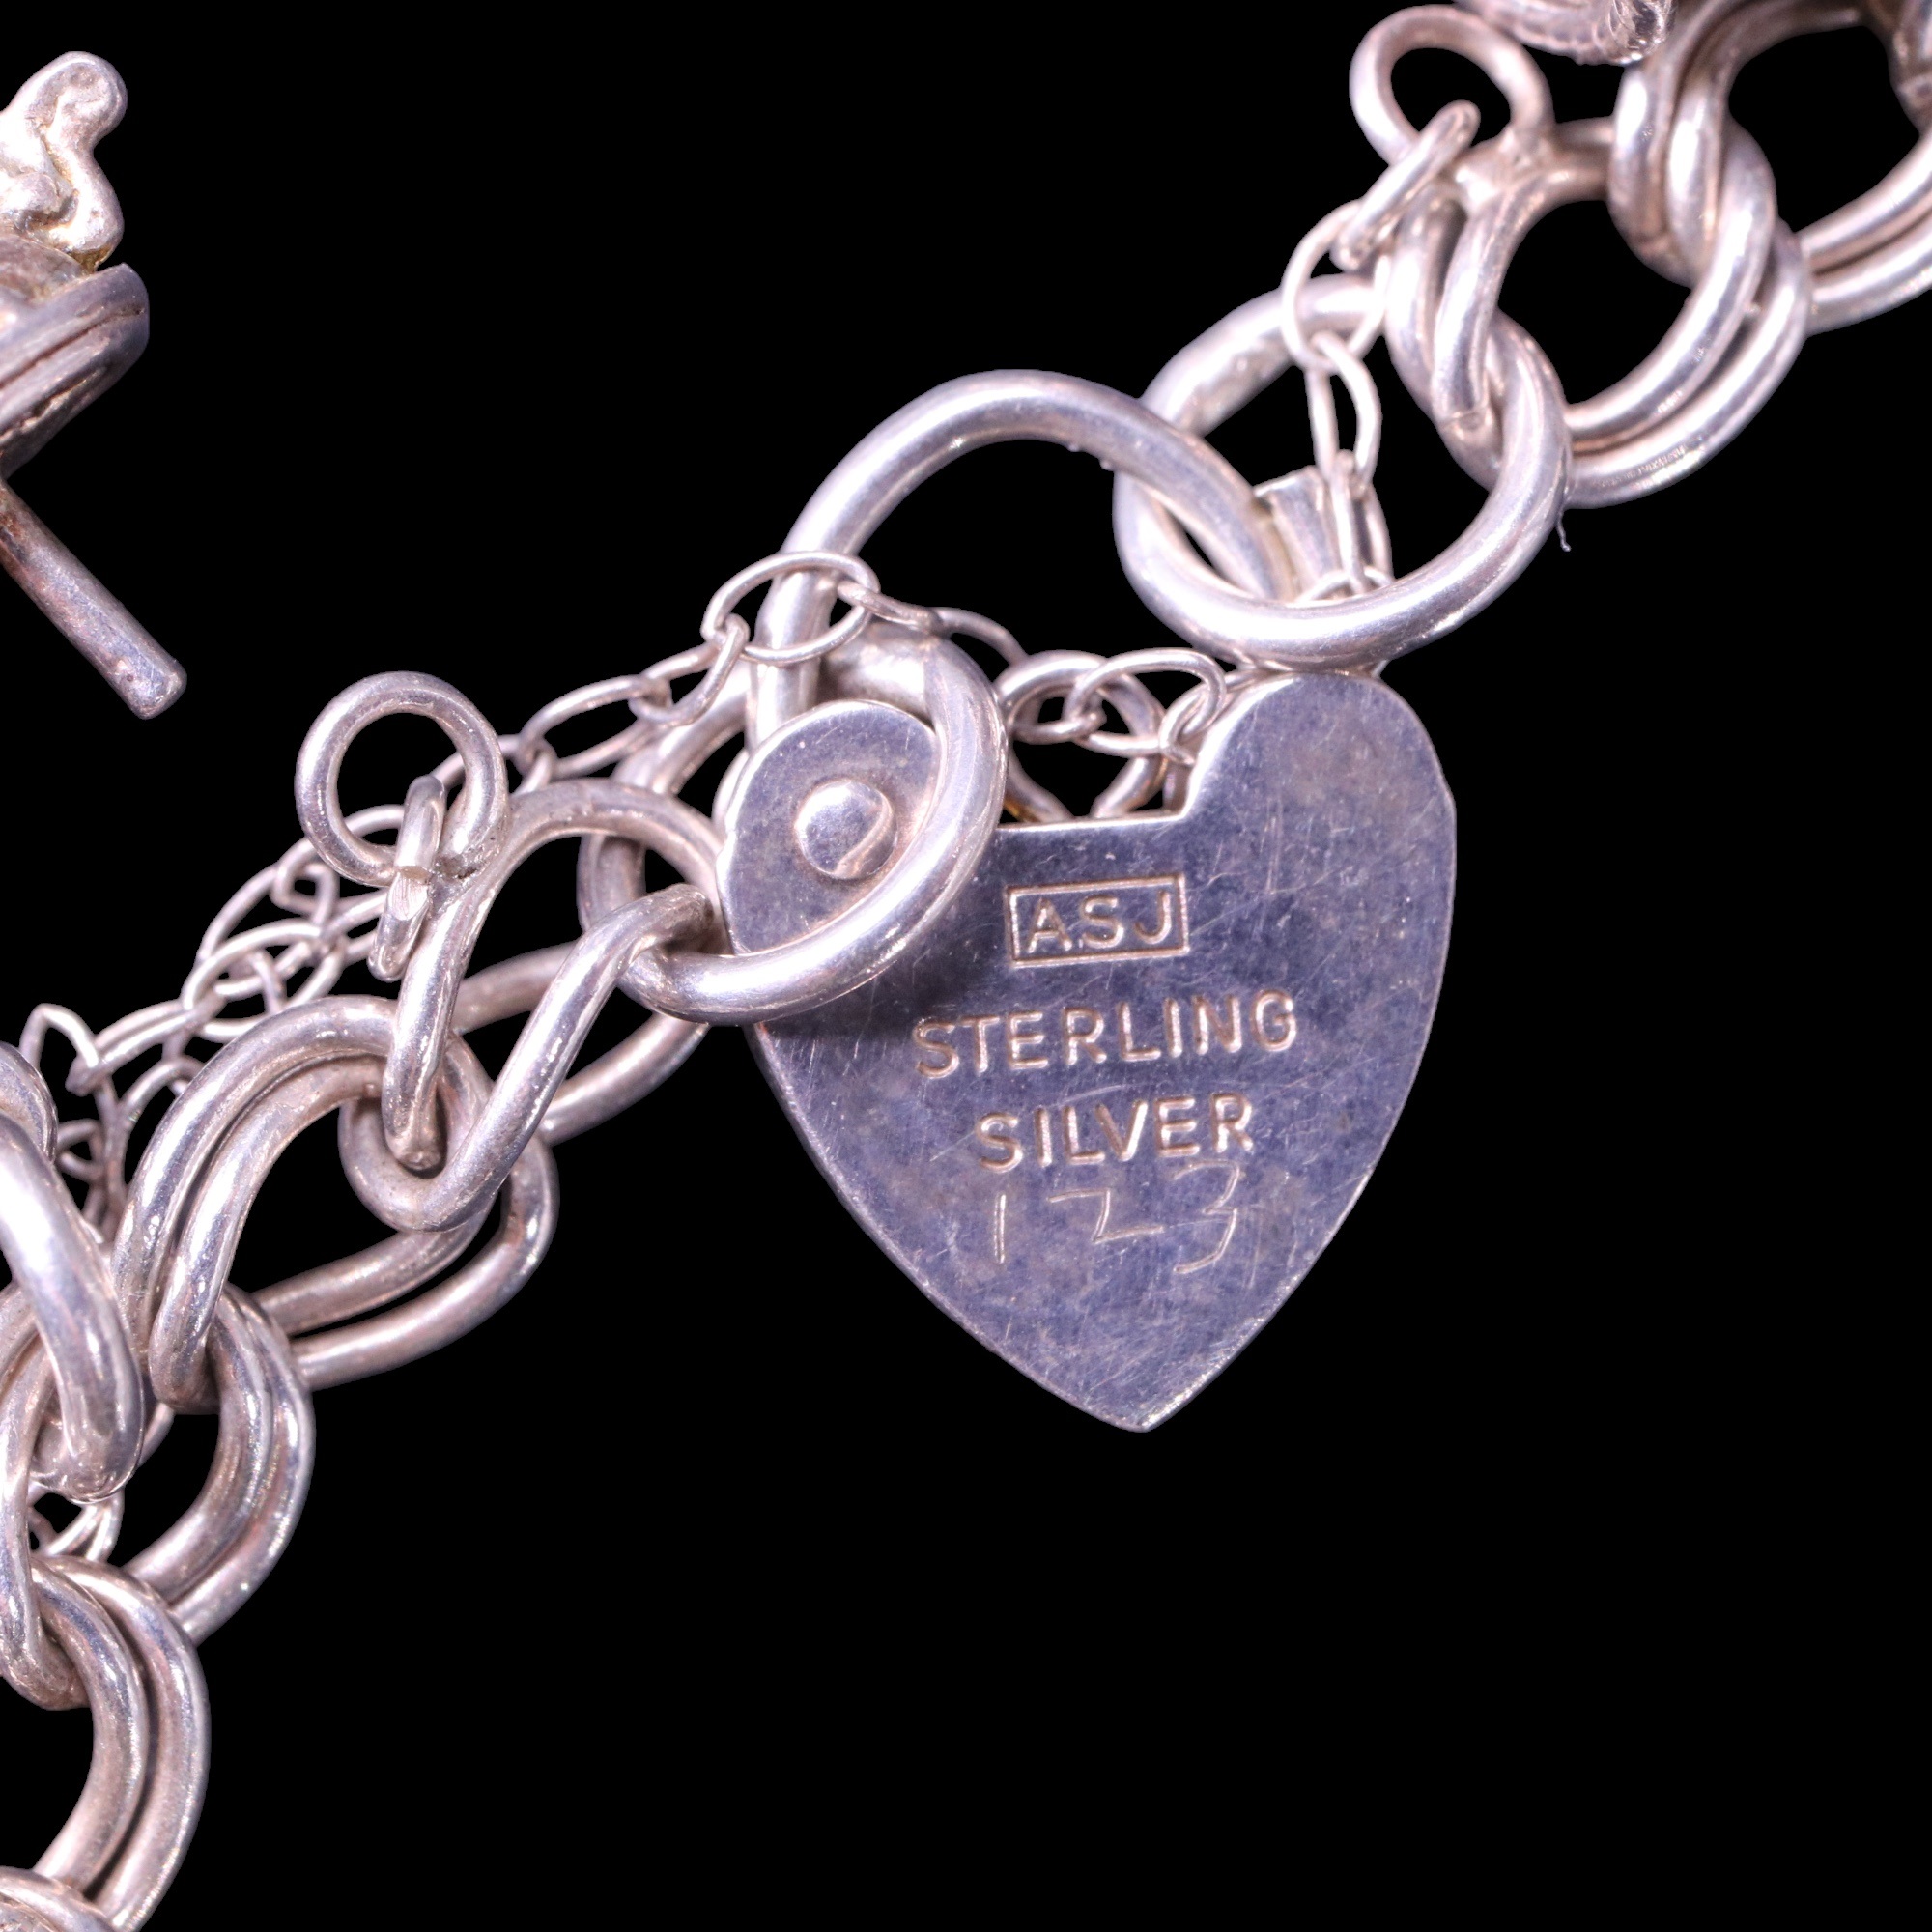 A near-contemporary silver charm bracelet, 47 g - Image 5 of 5